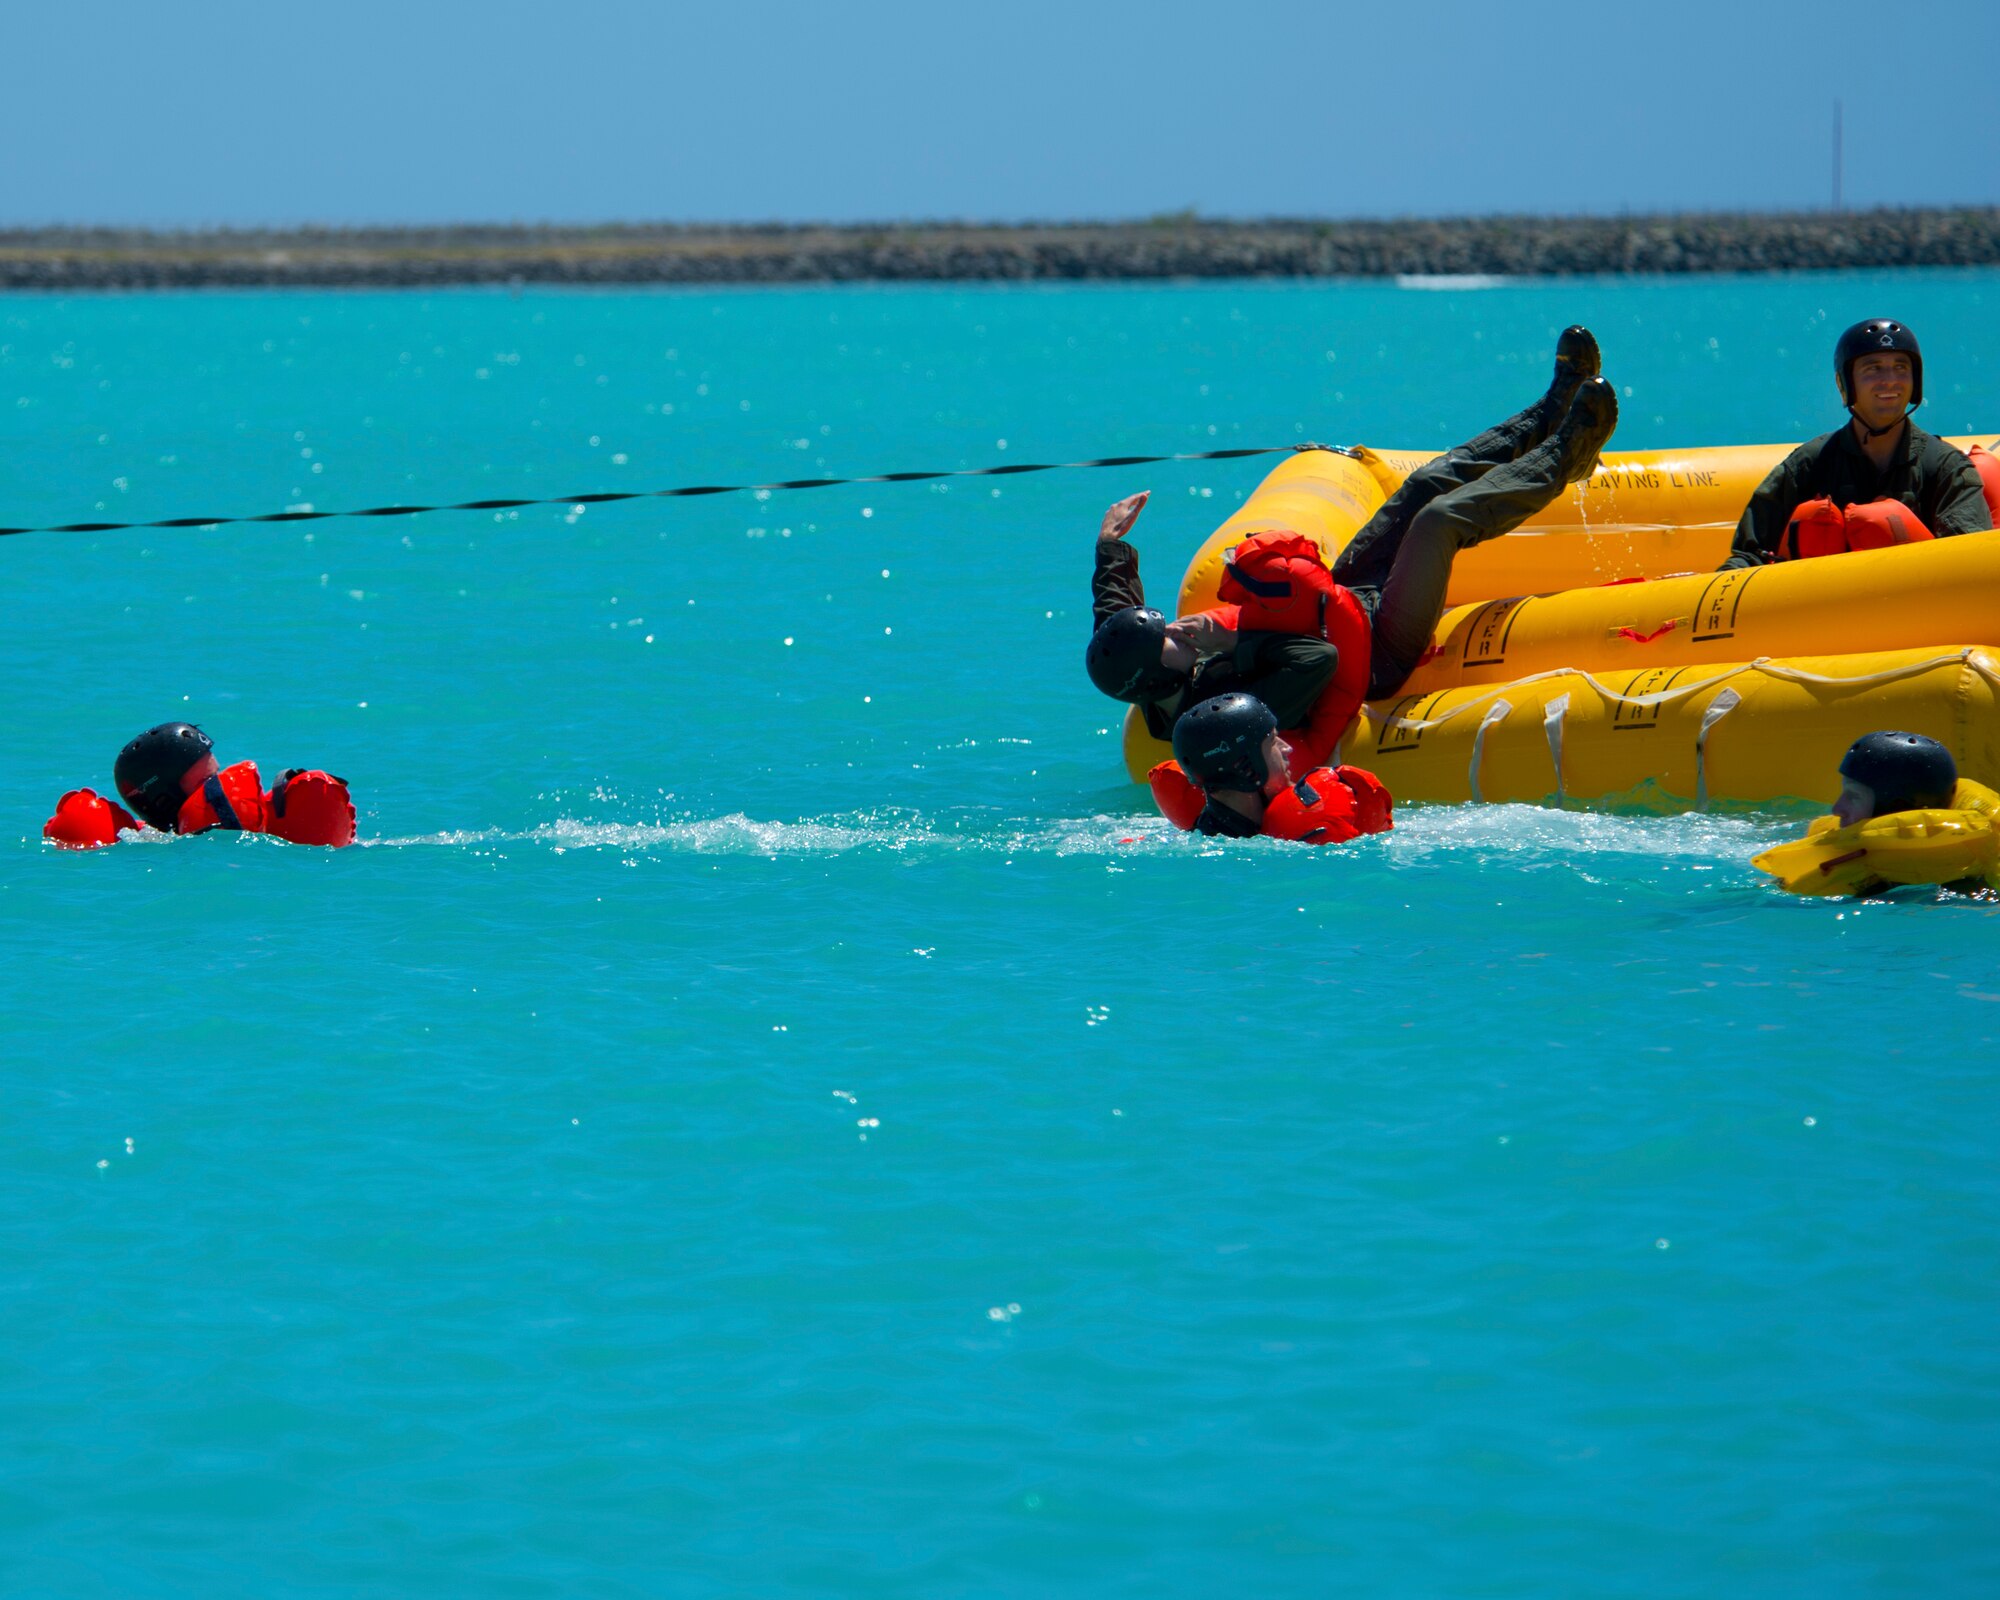 Airmen from the 535th Airlift Squadron, 65th Airlift Squadron and the 96th Air Refueling Squadron, egress from a 46-man life raft during water survival training on Joint Base Pearl Harbor-Hickam, Hawaii, March 23, 2015. Water survival training is completed on triennial basis for all aircrew assigned to the 15th Wing. (U.S. Air Force photo by Tech. Sgt. Aaron Oelrich/Released)  